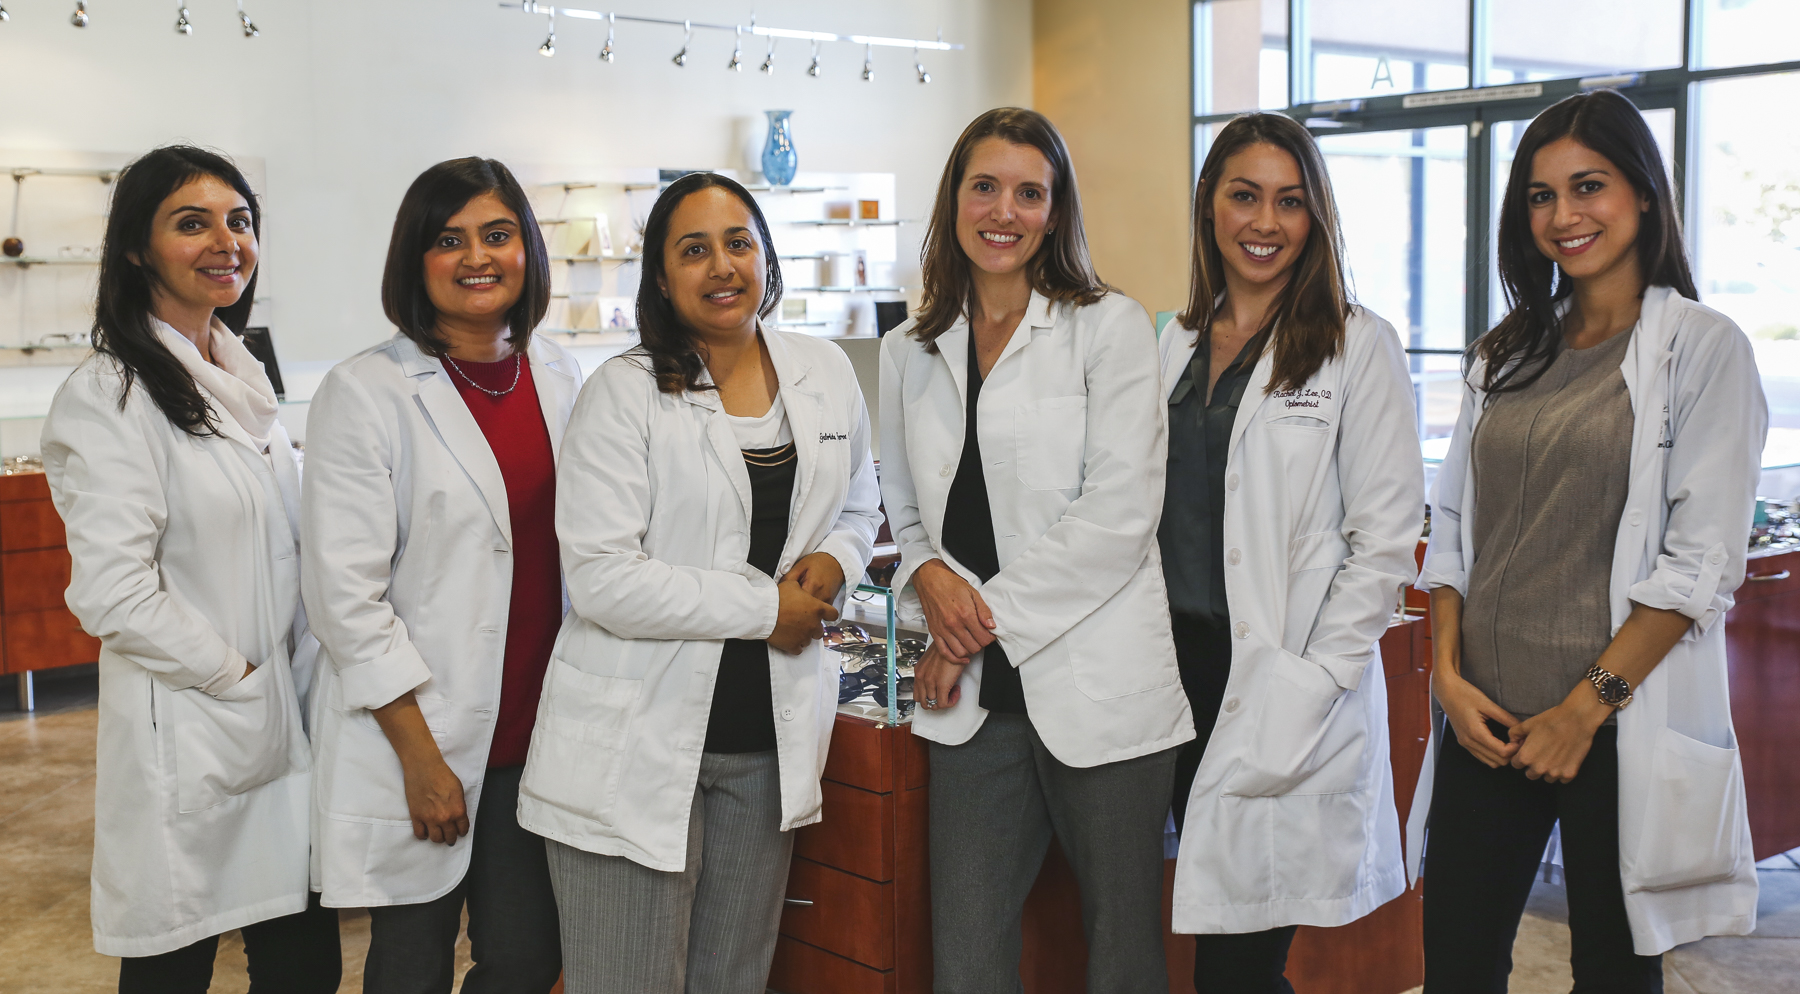 Eye Care Spring Valley - Exceptional Optometry, Eyewear, & Vision Care